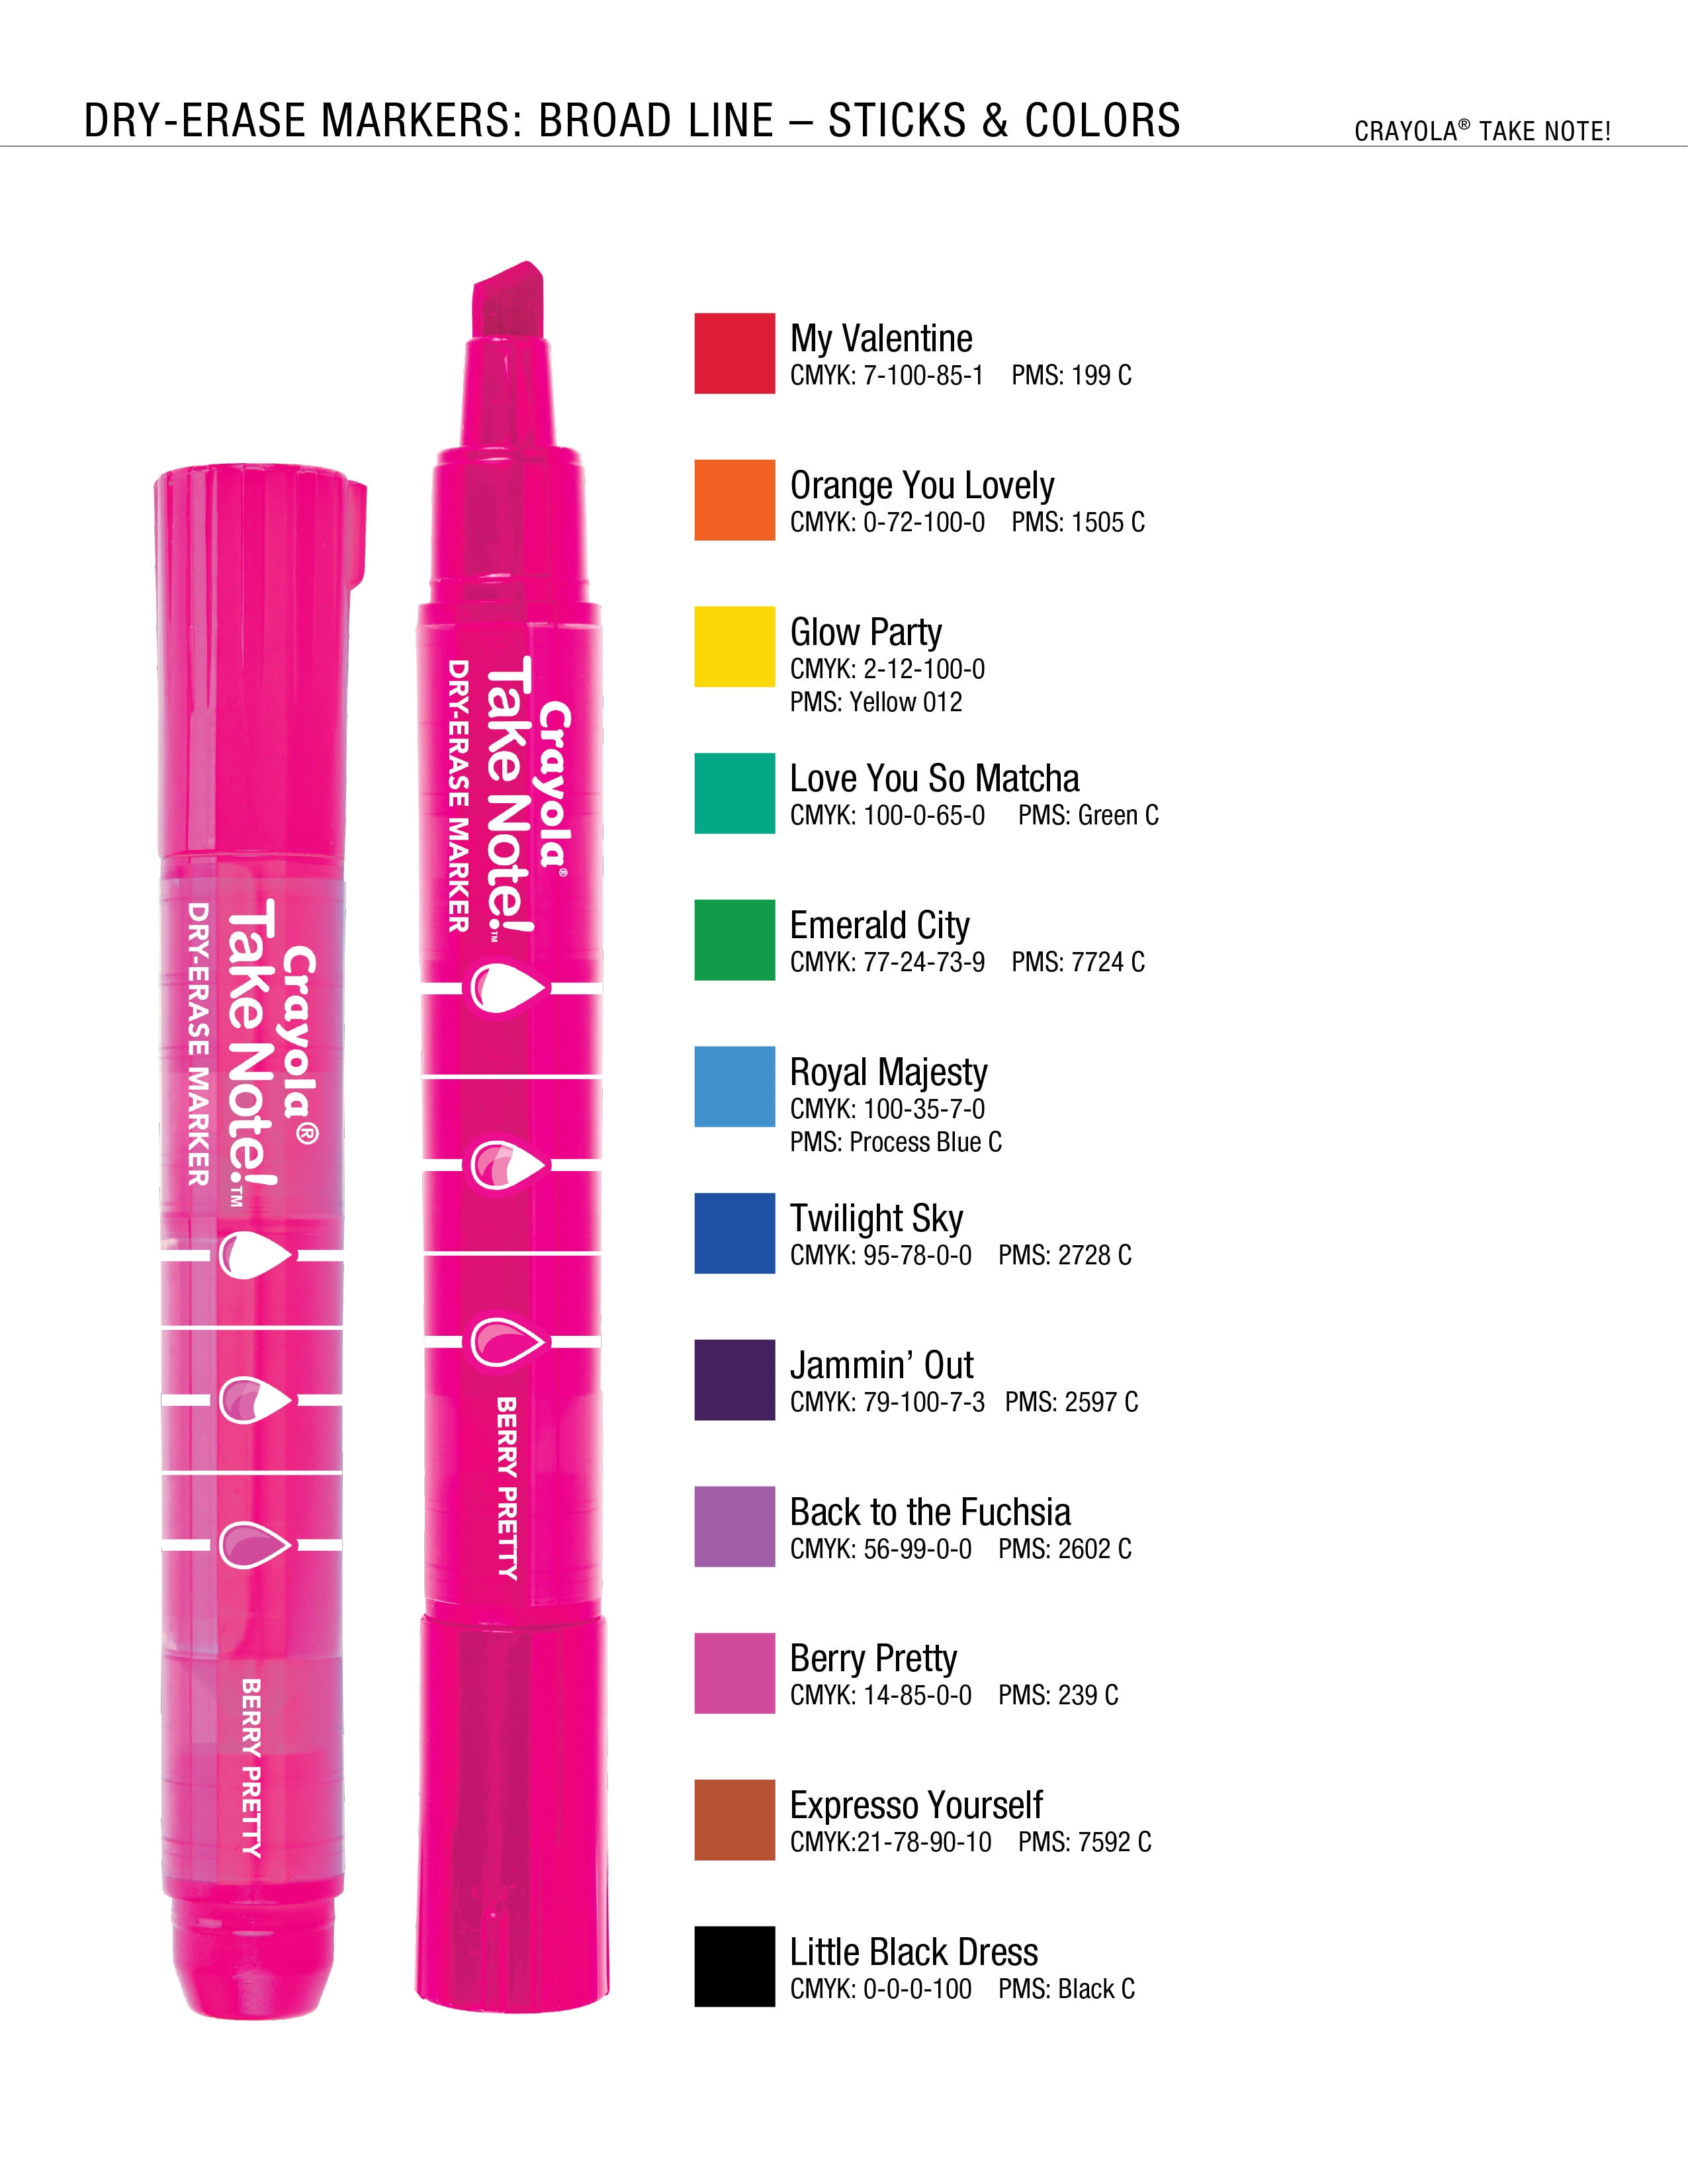 Crayola take note aka the best dry erase marker is back at a reasonabl